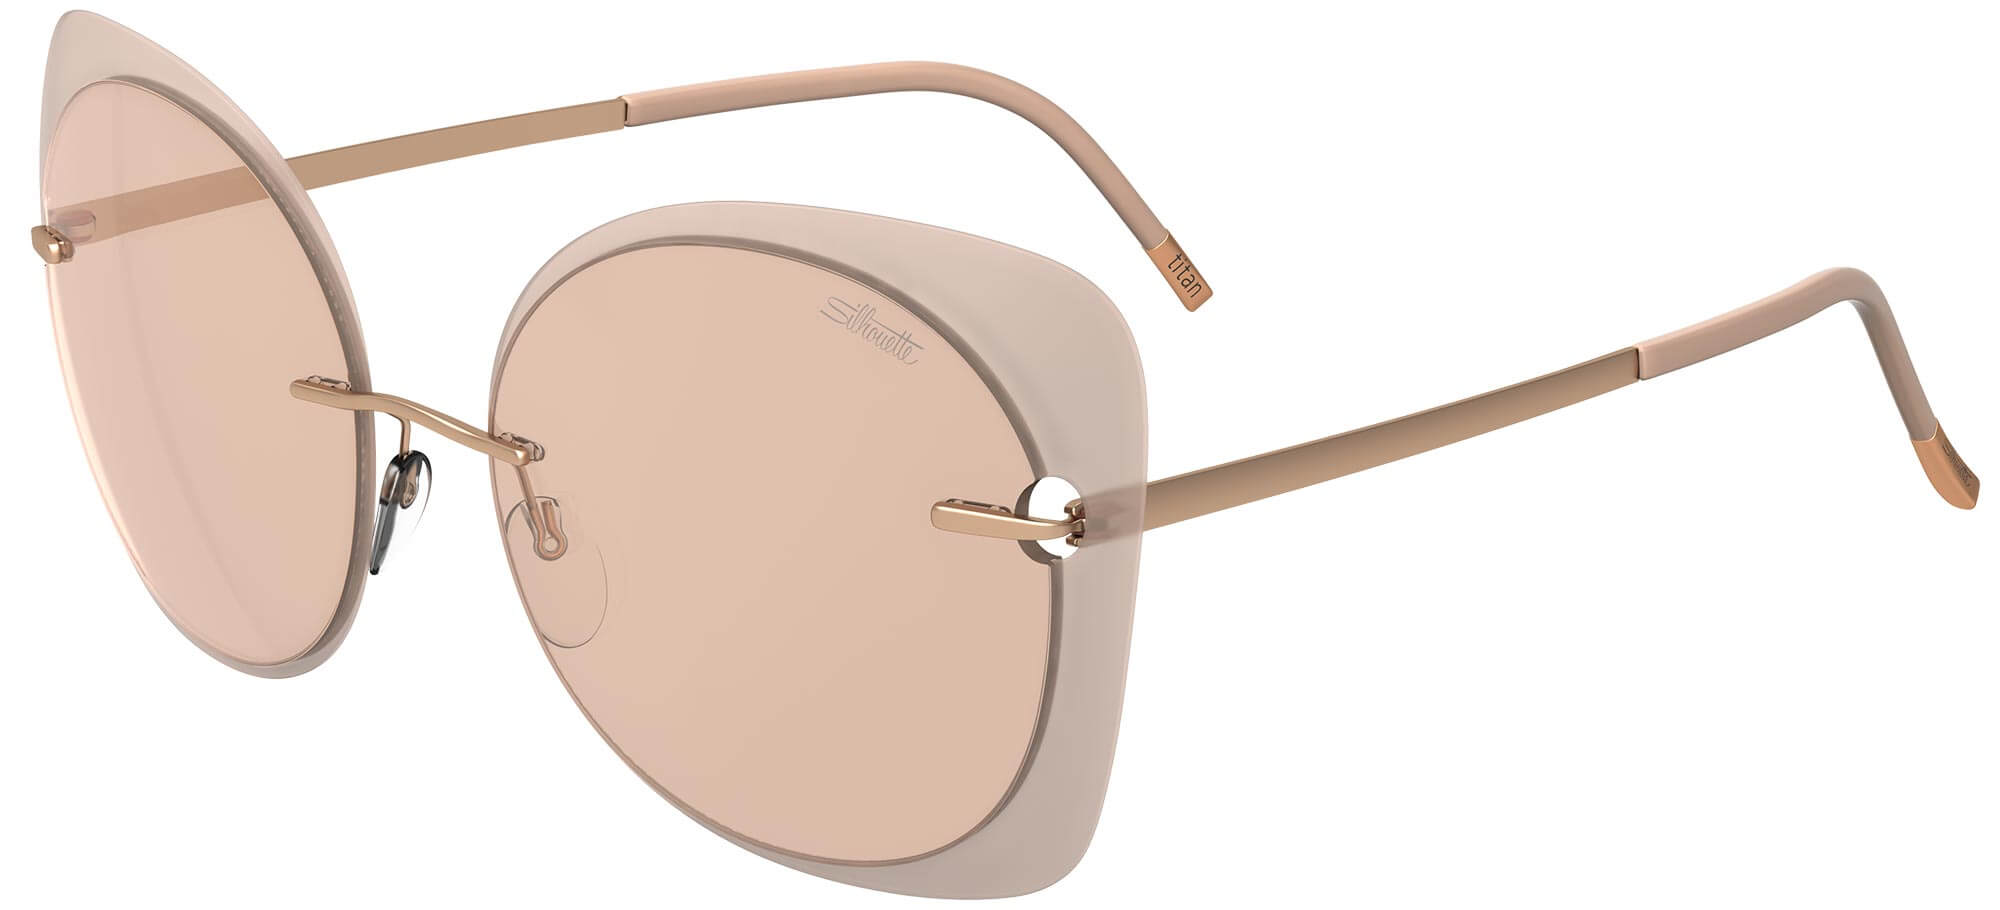 SilhouetteACCENT SHADES 8164Rose Gold/pink Grey (3530)